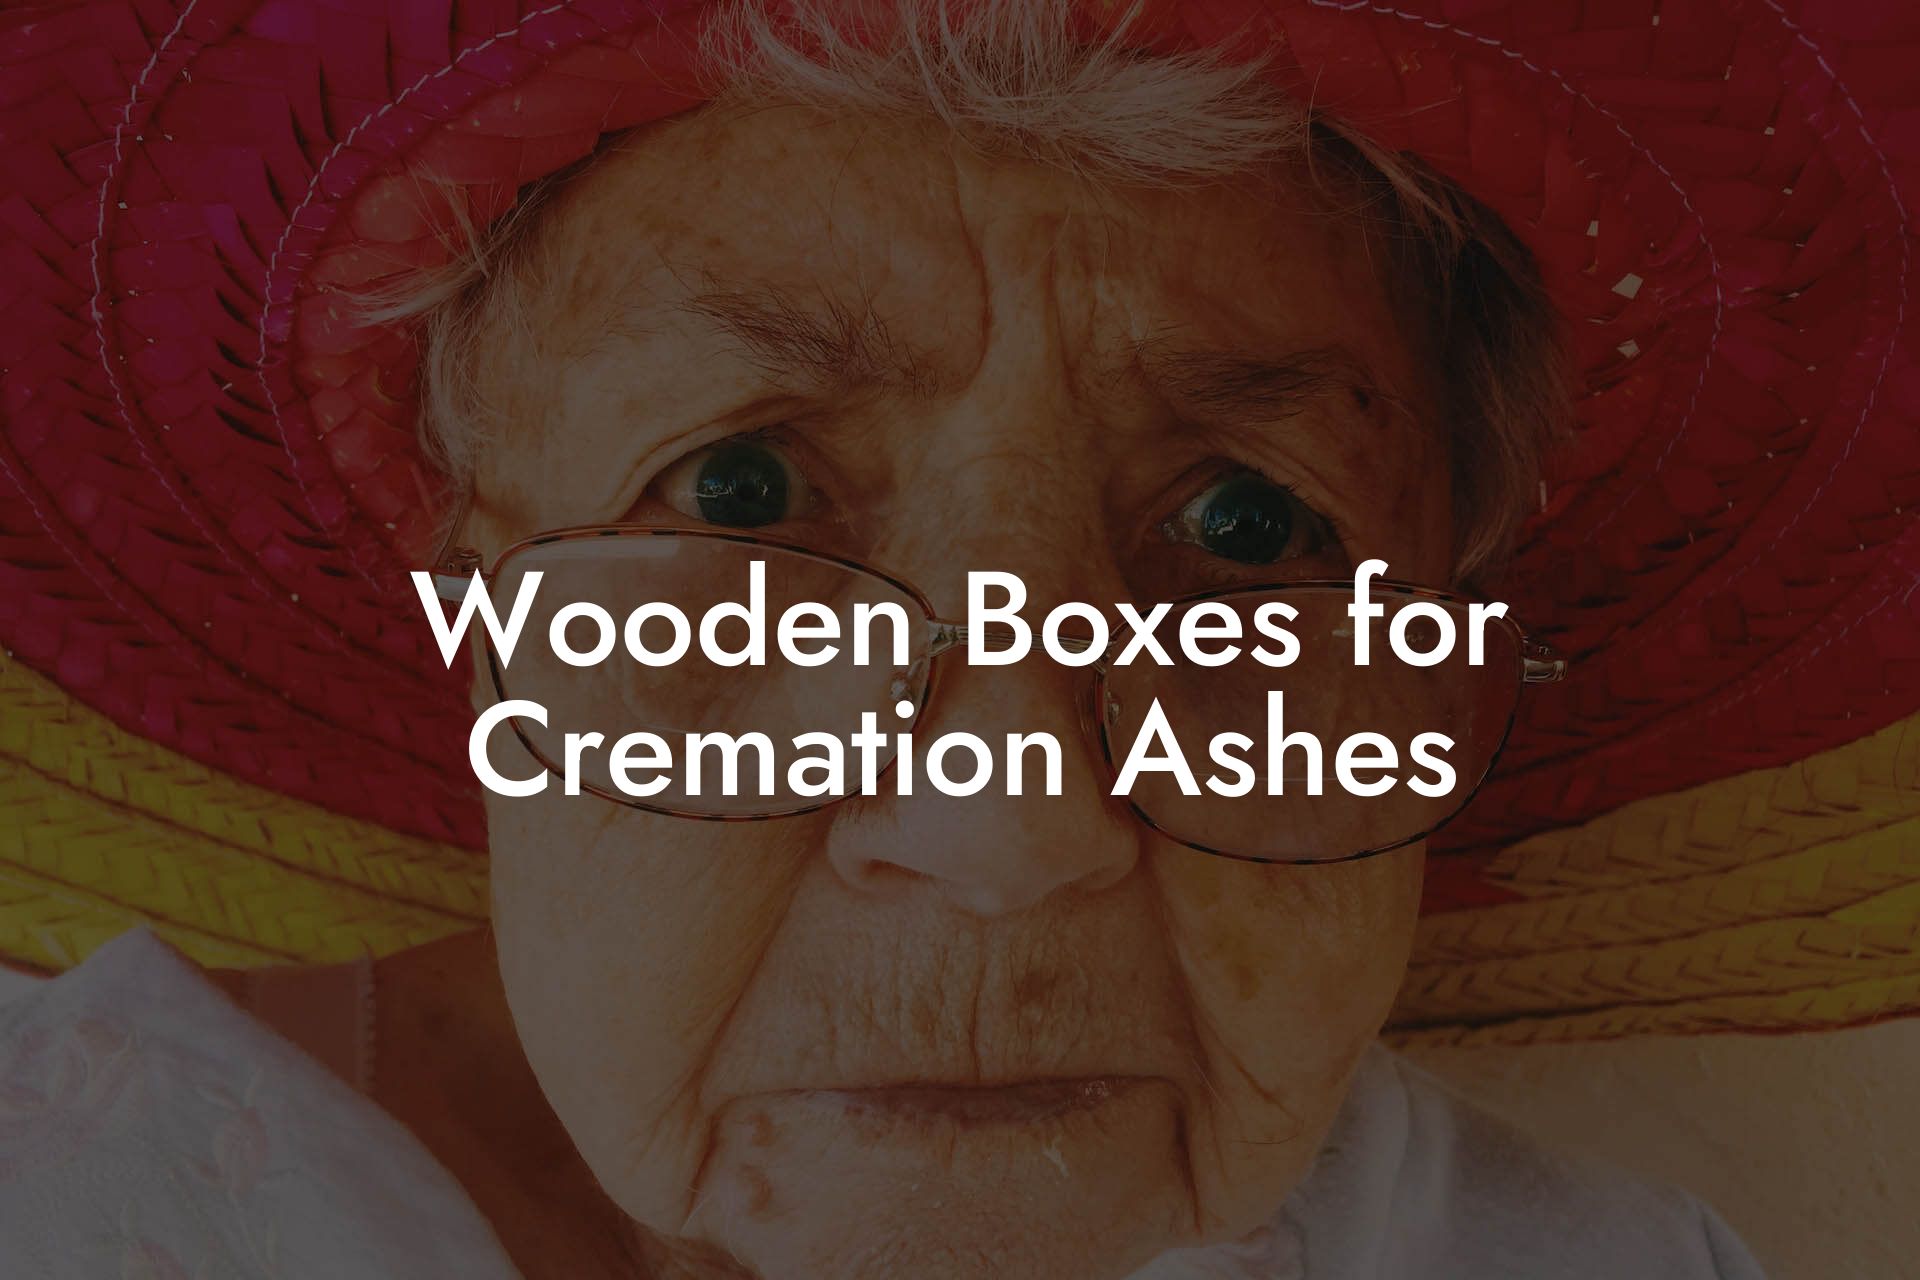 Wooden Boxes for Cremation Ashes